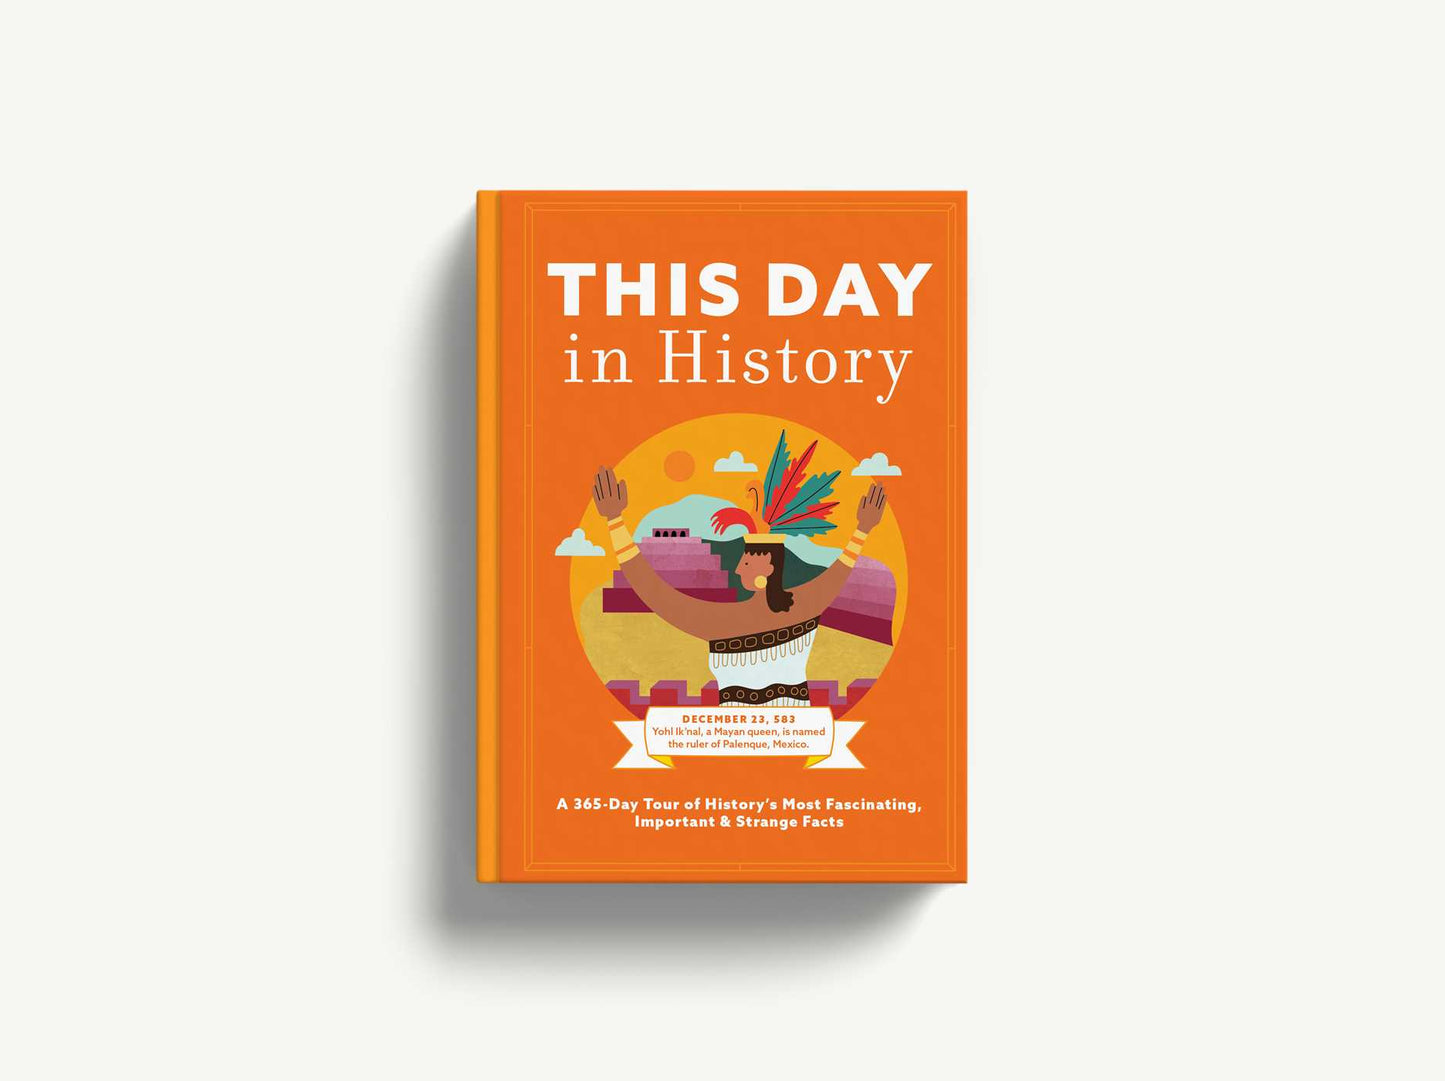 This Day in History: A 365-Day Tour of History's Most Fascinating, Important & Strange Facts & Figures